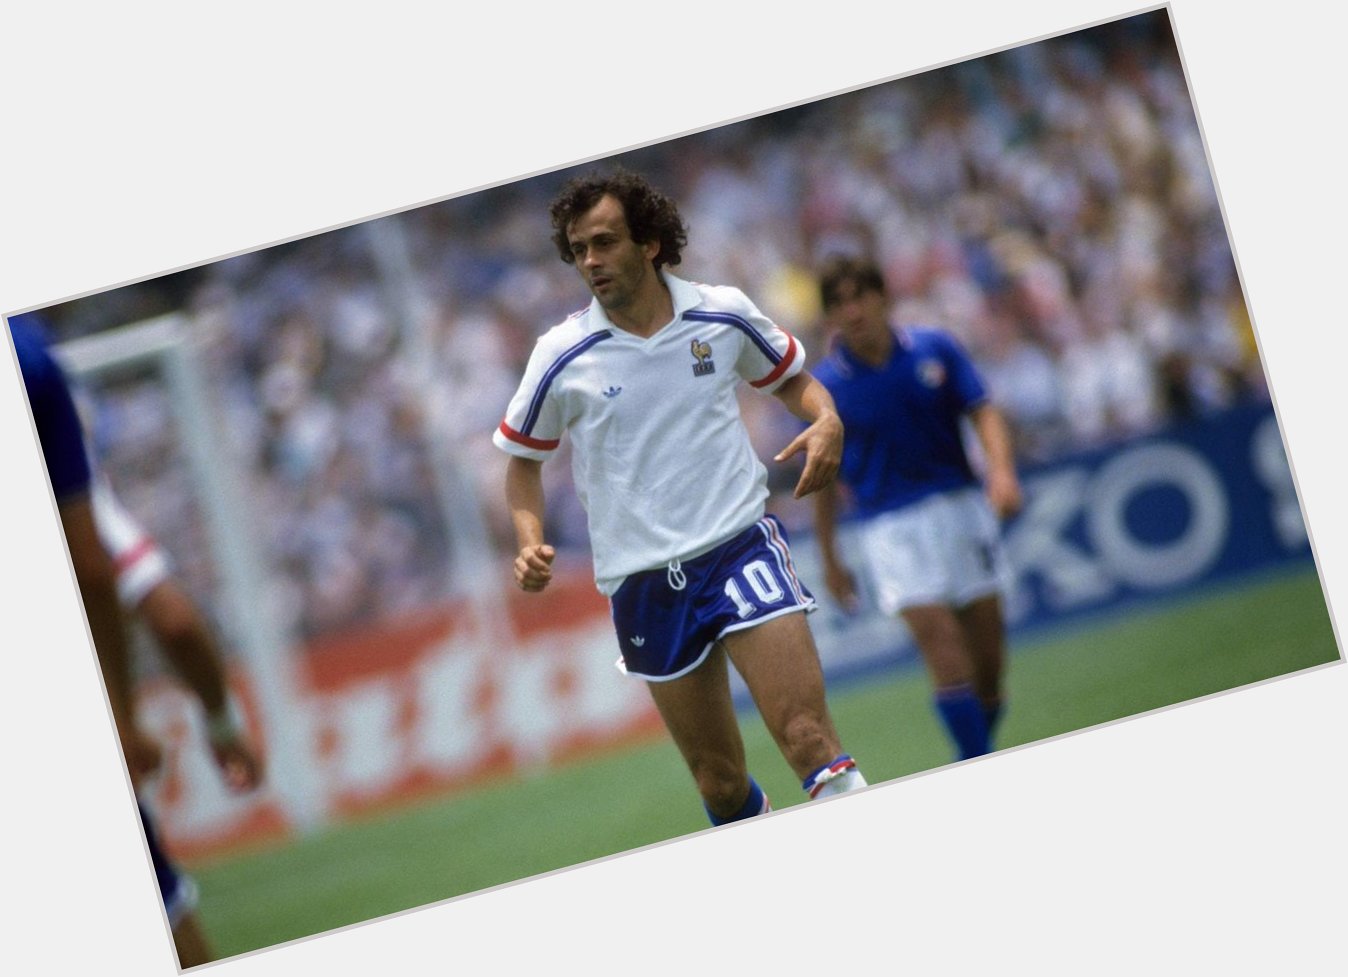 Happy birthday to France and Juventus legend Michel Platini, who turns 63 today! 